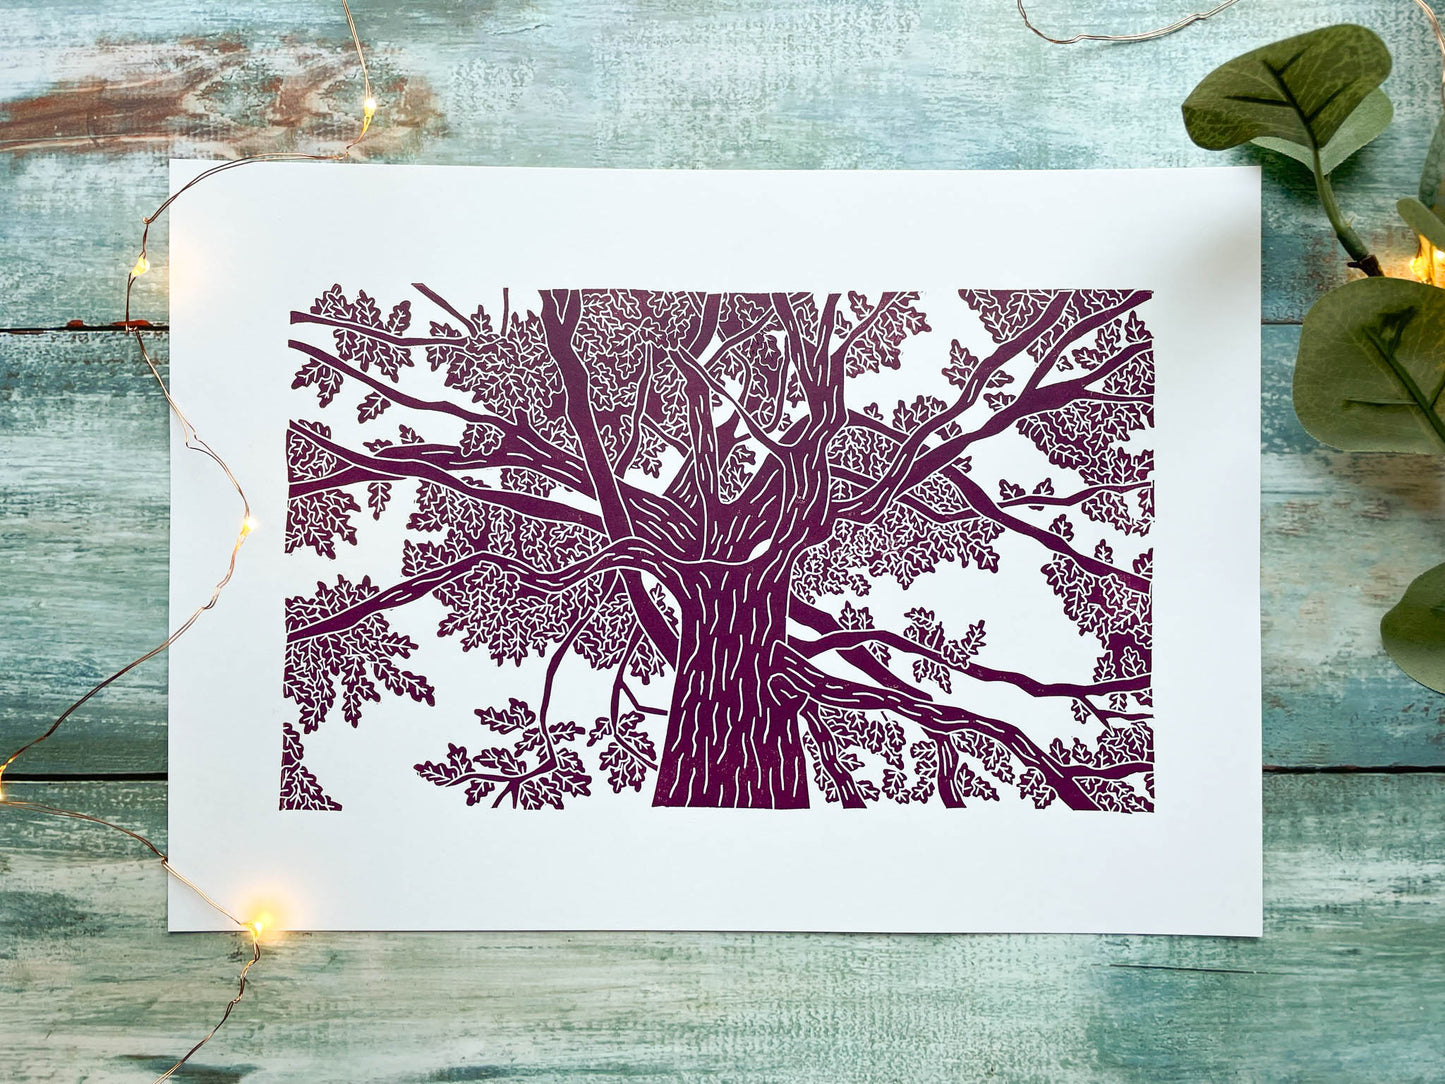 A lino print of an oak tree as viewed from standing under it and looking up in plum